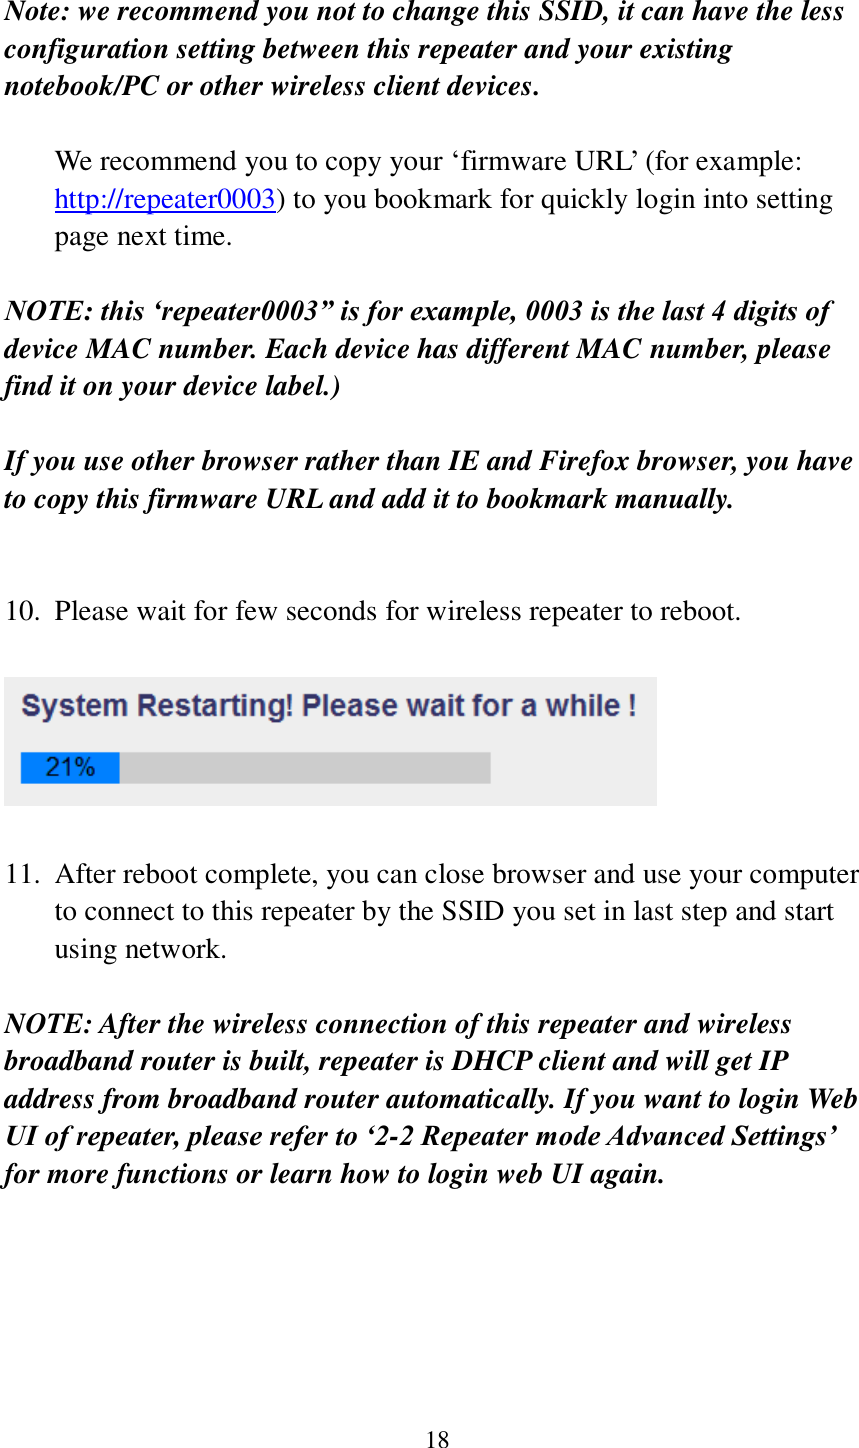 18  Note: we recommend you not to change this SSID, it can have the less configuration setting between this repeater and your existing notebook/PC or other wireless client devices.  We recommend you to copy your ‘firmware URL’ (for example: http://repeater0003) to you bookmark for quickly login into setting page next time.  NOTE: this ‘repeater0003” is for example, 0003 is the last 4 digits of device MAC number. Each device has different MAC number, please find it on your device label.)  If you use other browser rather than IE and Firefox browser, you have to copy this firmware URL and add it to bookmark manually.   10. Please wait for few seconds for wireless repeater to reboot.      11. After reboot complete, you can close browser and use your computer to connect to this repeater by the SSID you set in last step and start using network.  NOTE: After the wireless connection of this repeater and wireless broadband router is built, repeater is DHCP client and will get IP address from broadband router automatically. If you want to login Web UI of repeater, please refer to ‘2-2 Repeater mode Advanced Settings’ for more functions or learn how to login web UI again.    